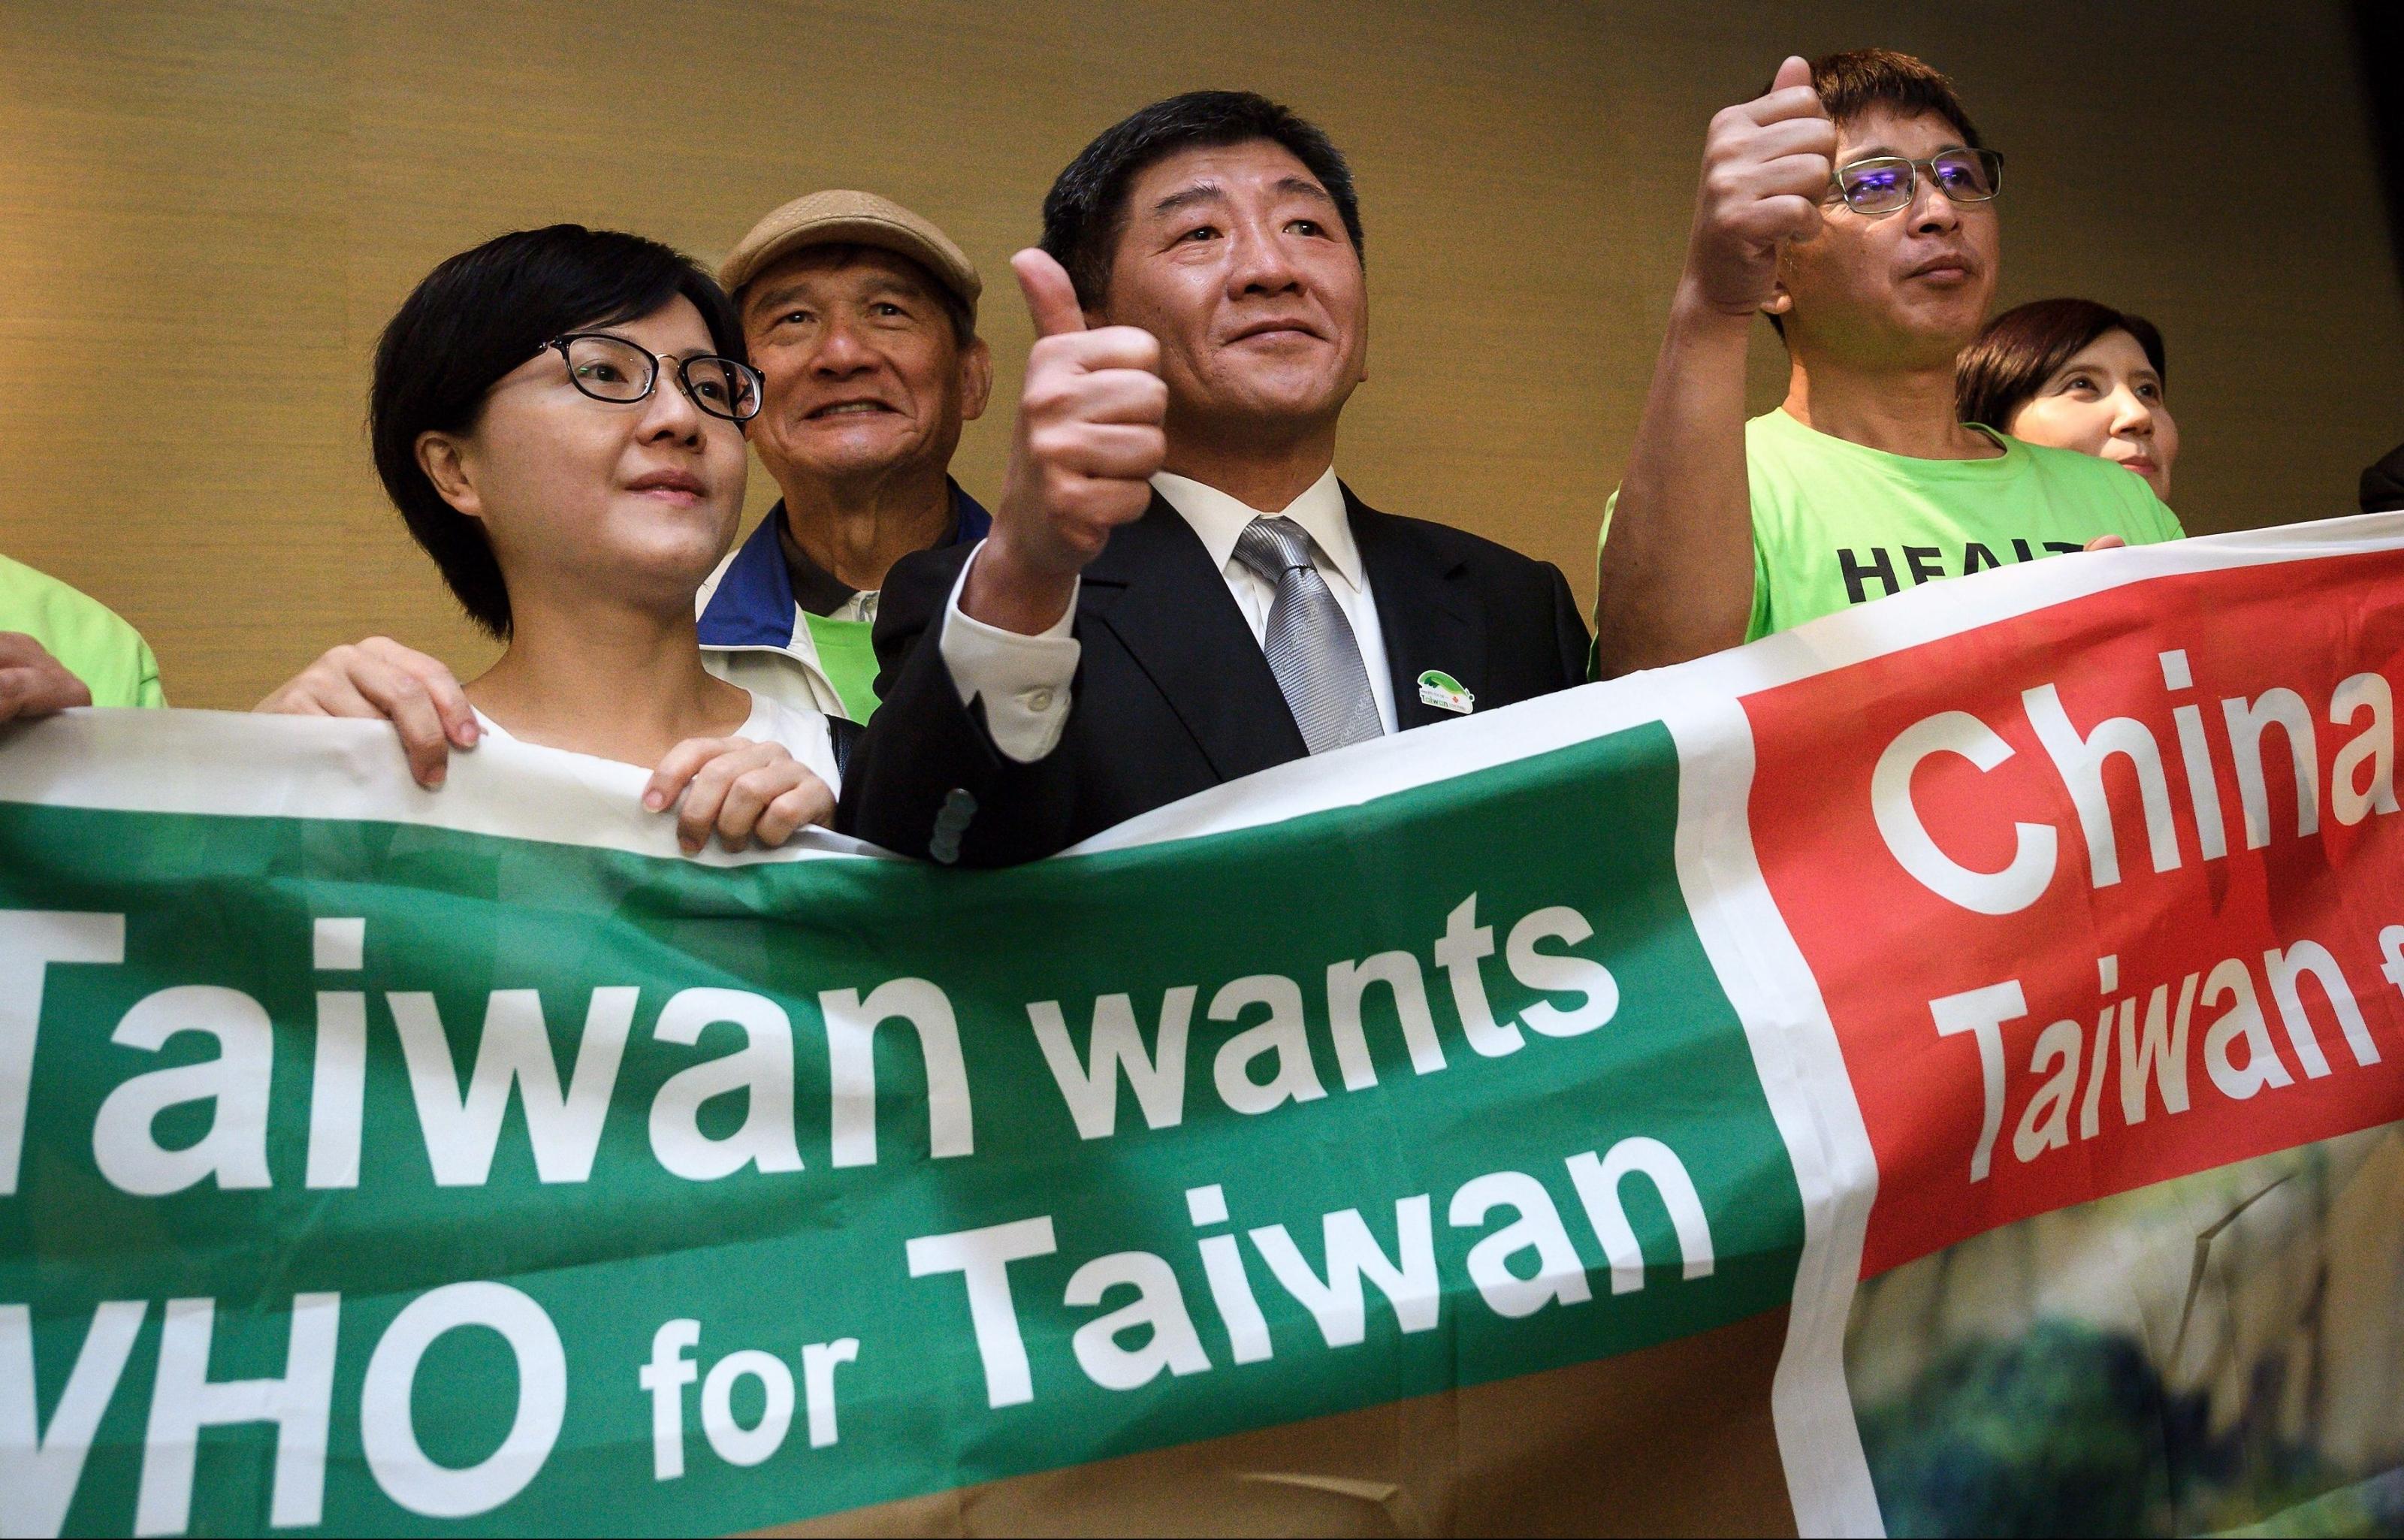 Appeal: Taiwan must join WHO as soon as possible